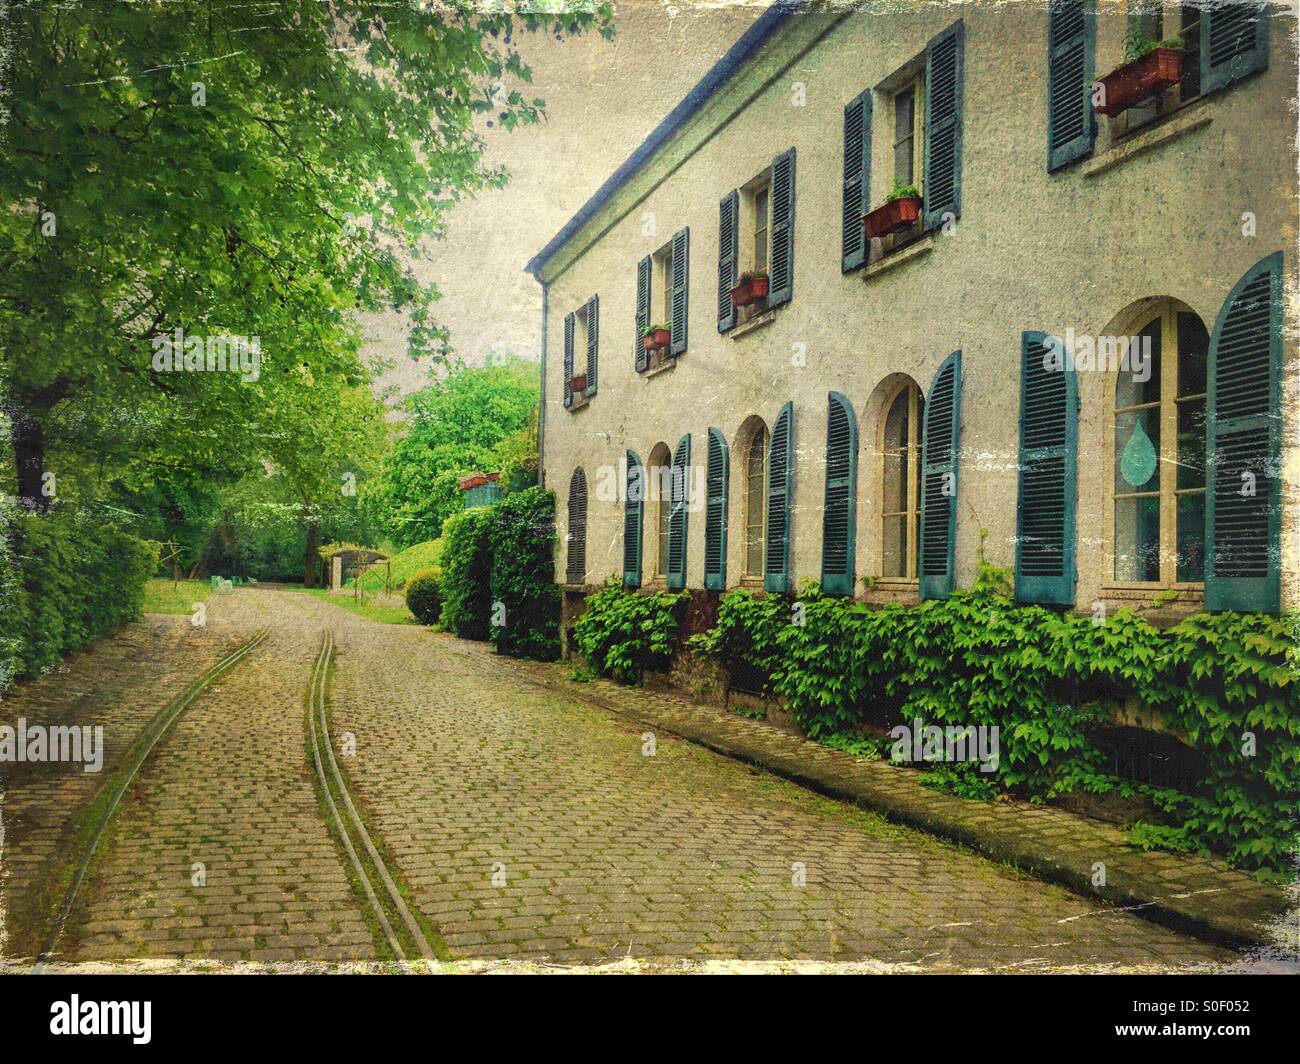 View of Maison du Jardinage with pretty blue shutters at Parc de Bercy in Paris, France. Brick pavement, trees and fresh Spring foliage with vintage texture overlay. Stock Photo